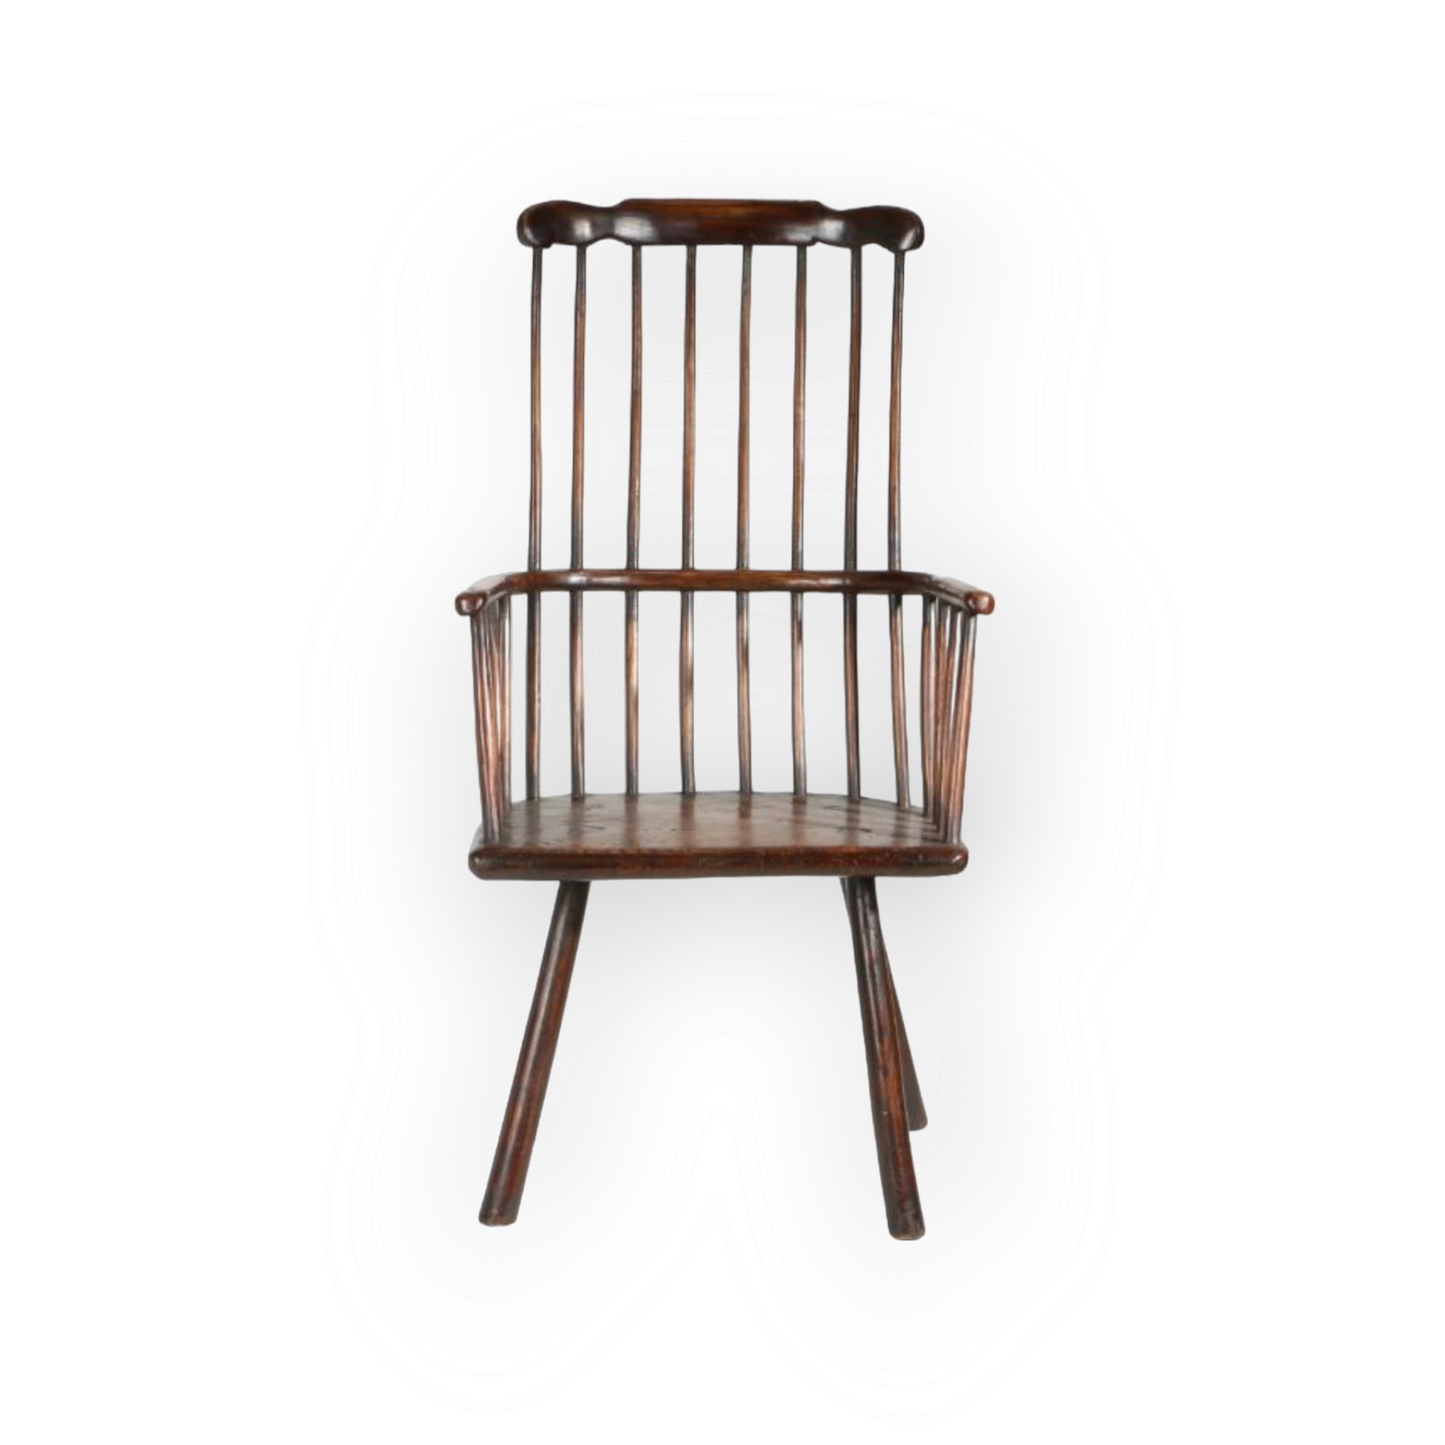 A Late 18th Century / Early 19th Century George III Period English Antique Ash & Elm Comb Back Windsor Armchair